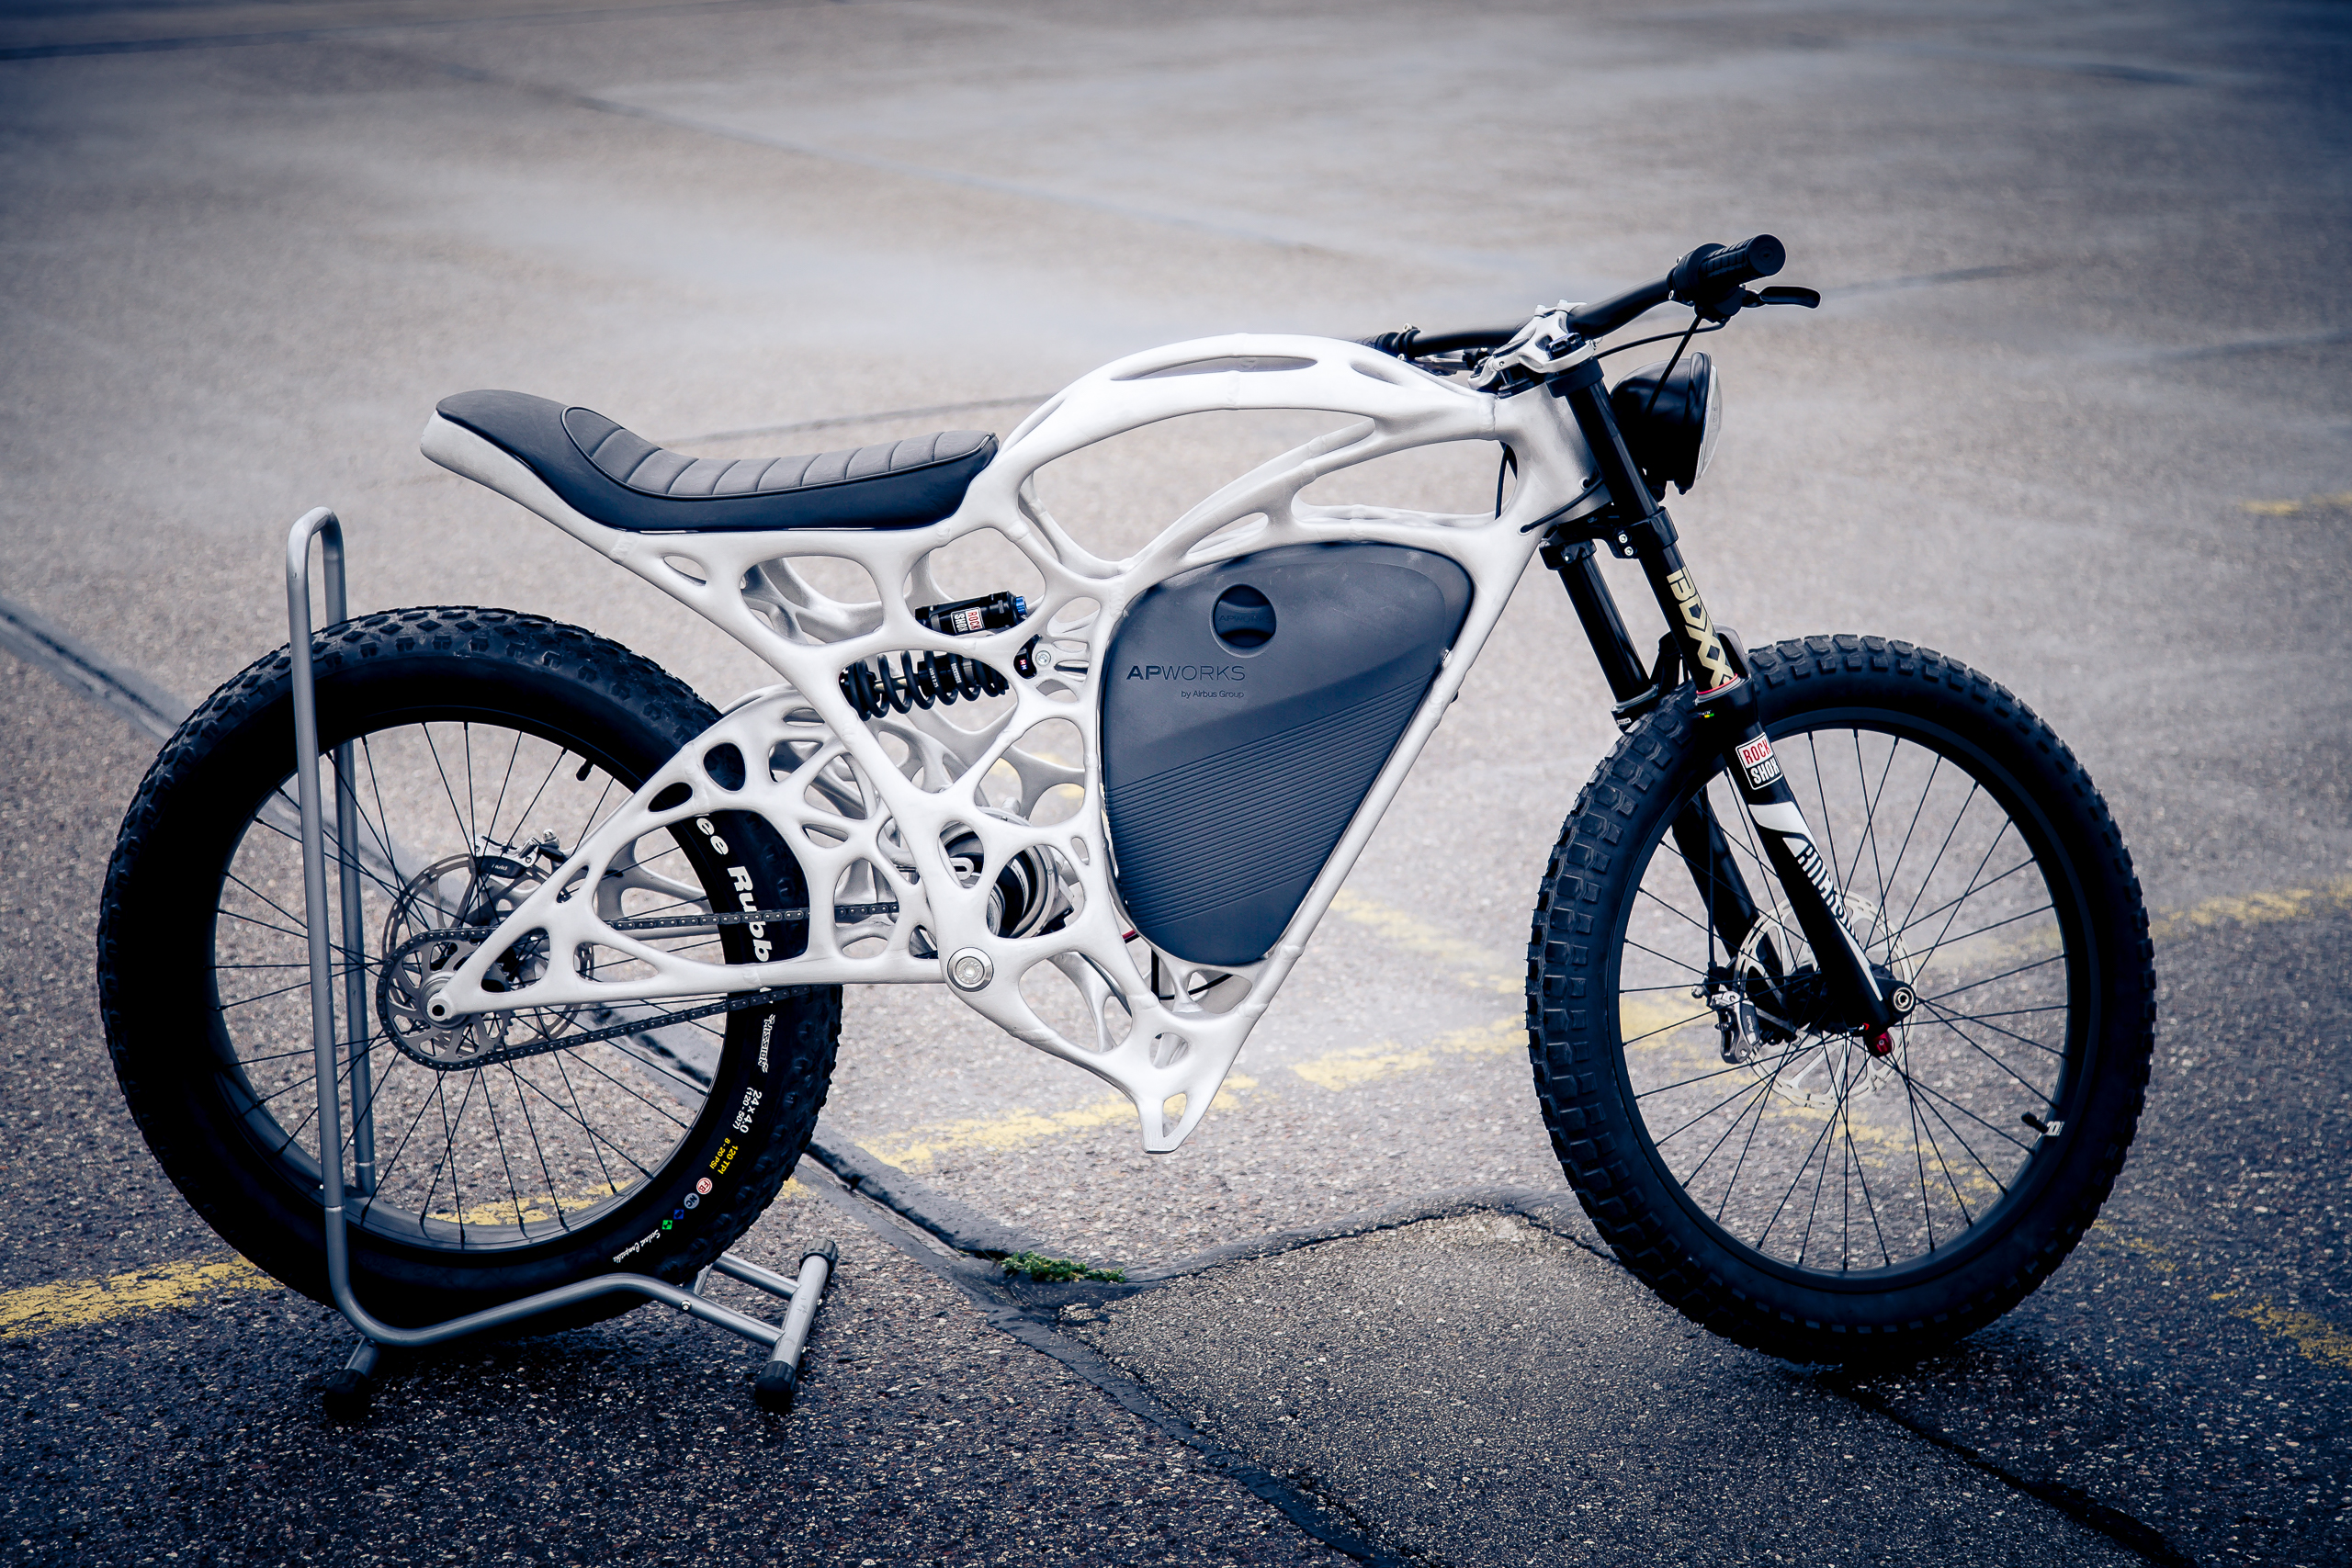 You Can Buy This Crazy, Alien-Like 3D Printed Electric Motorcycle